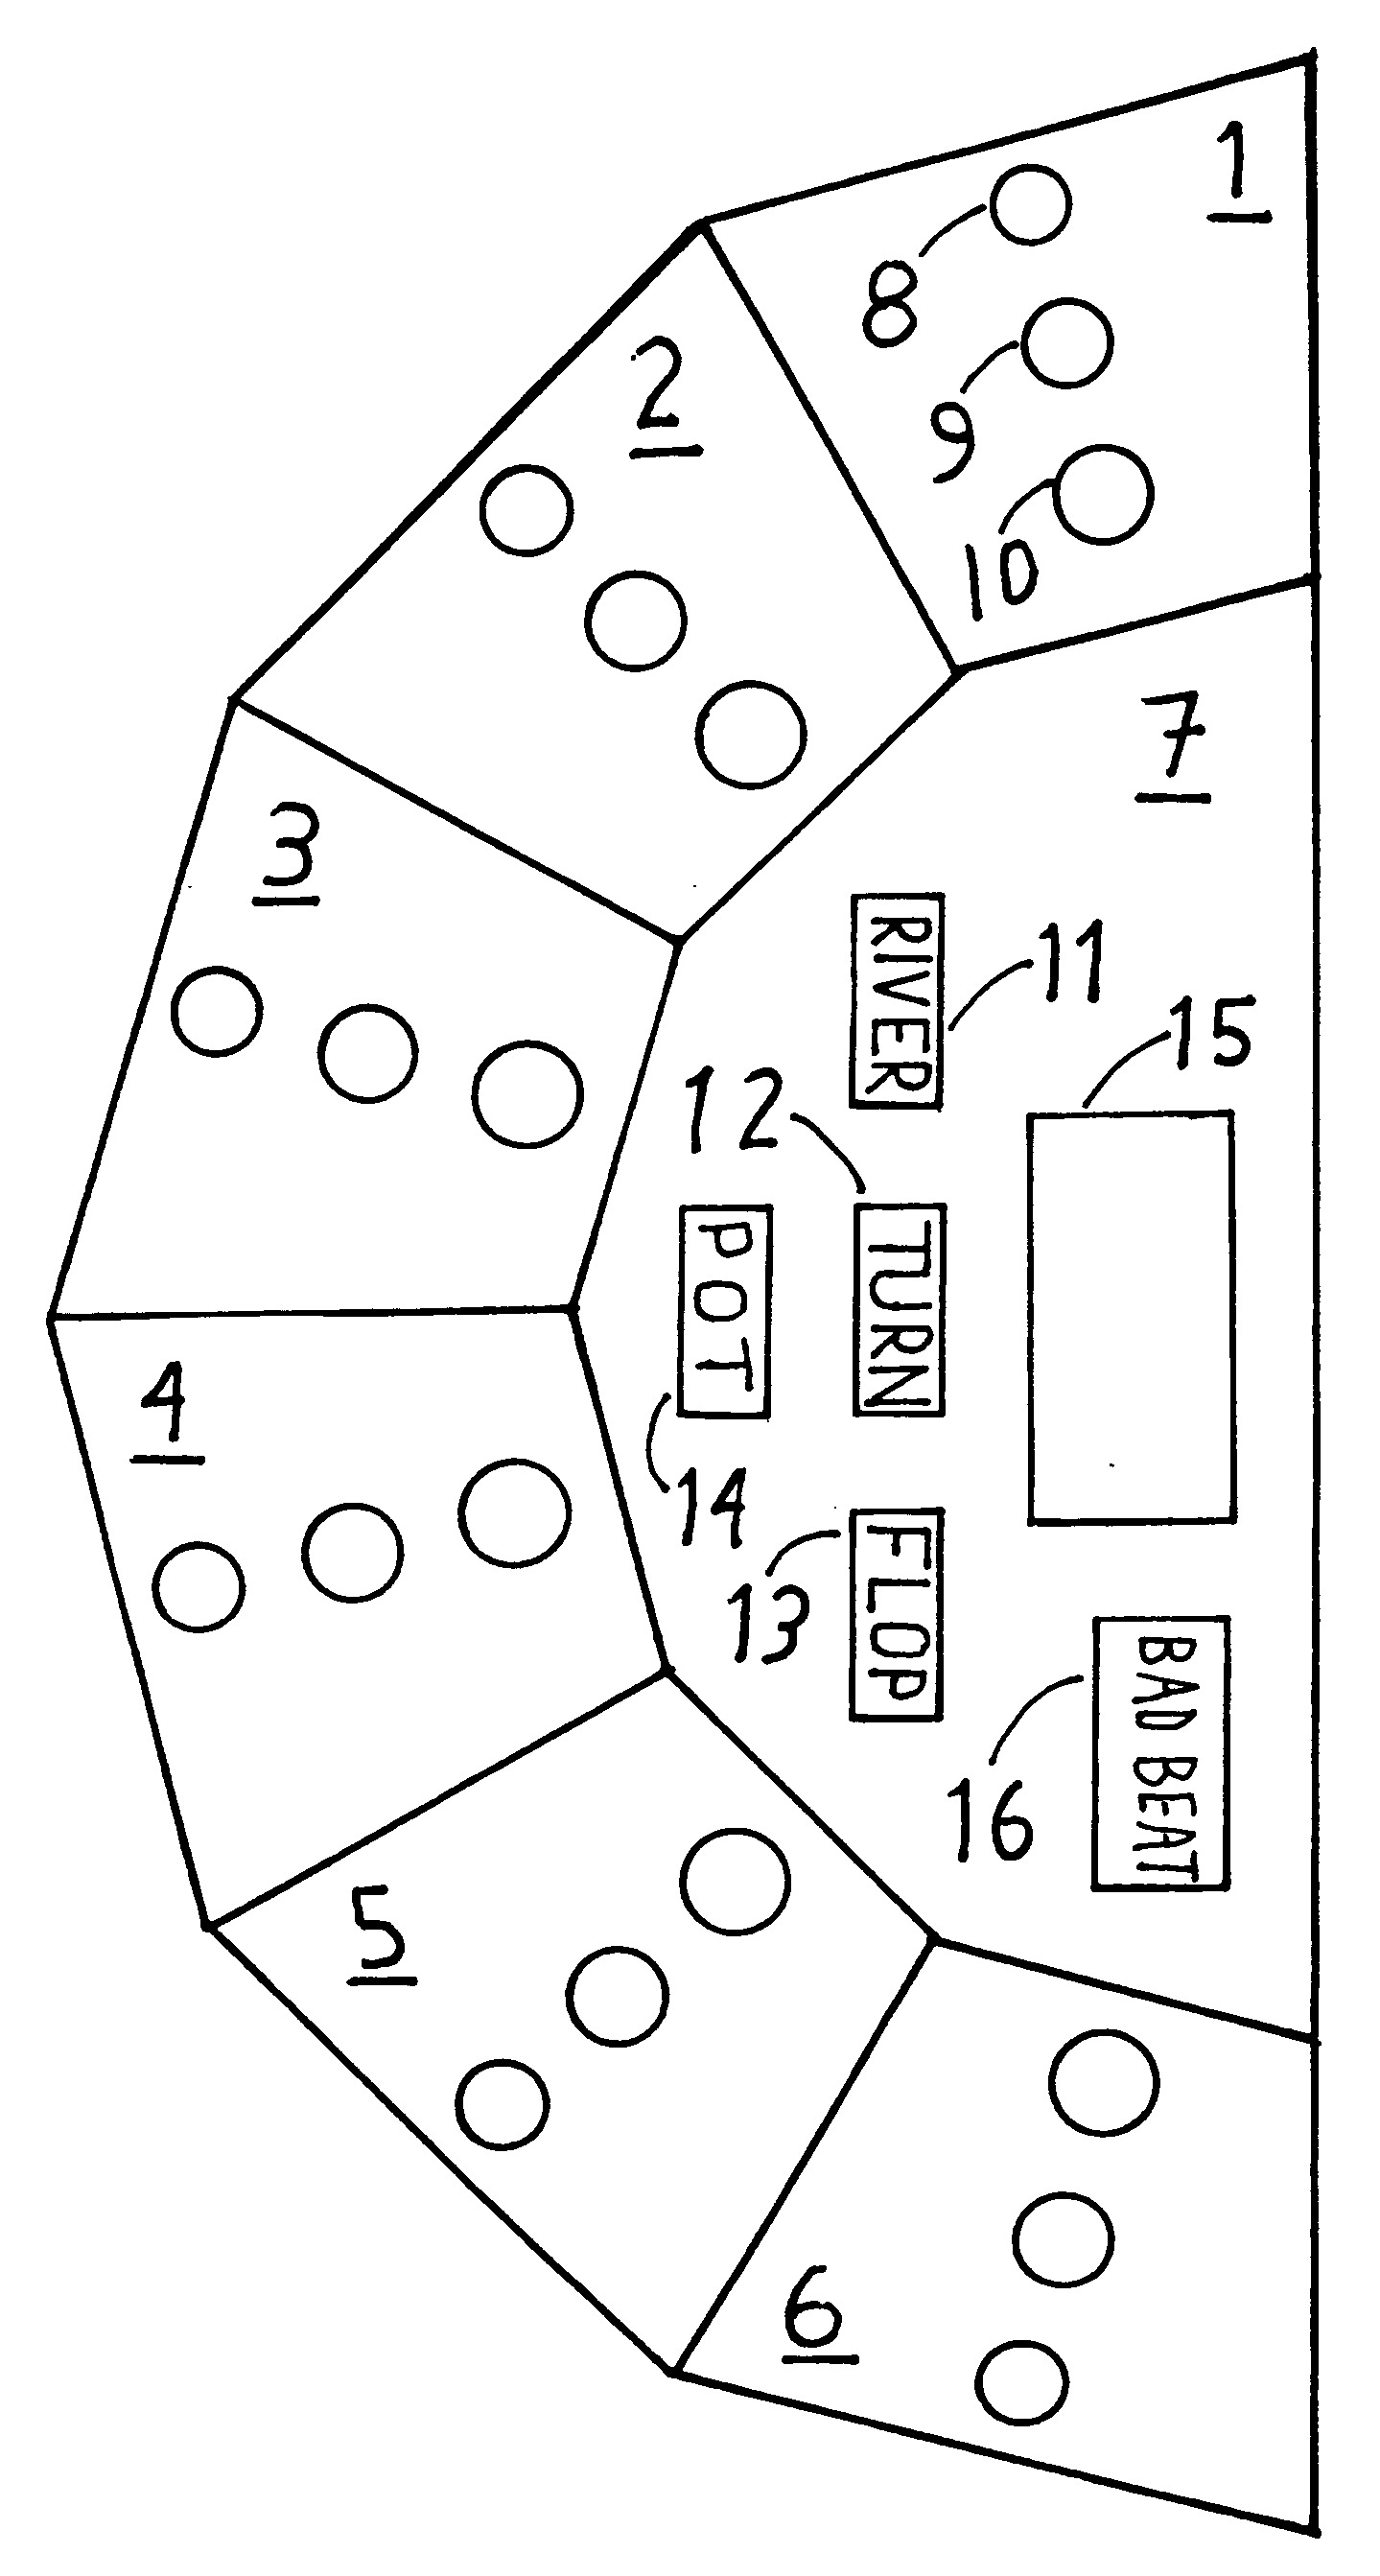 Method of and apparatus for playing a card game